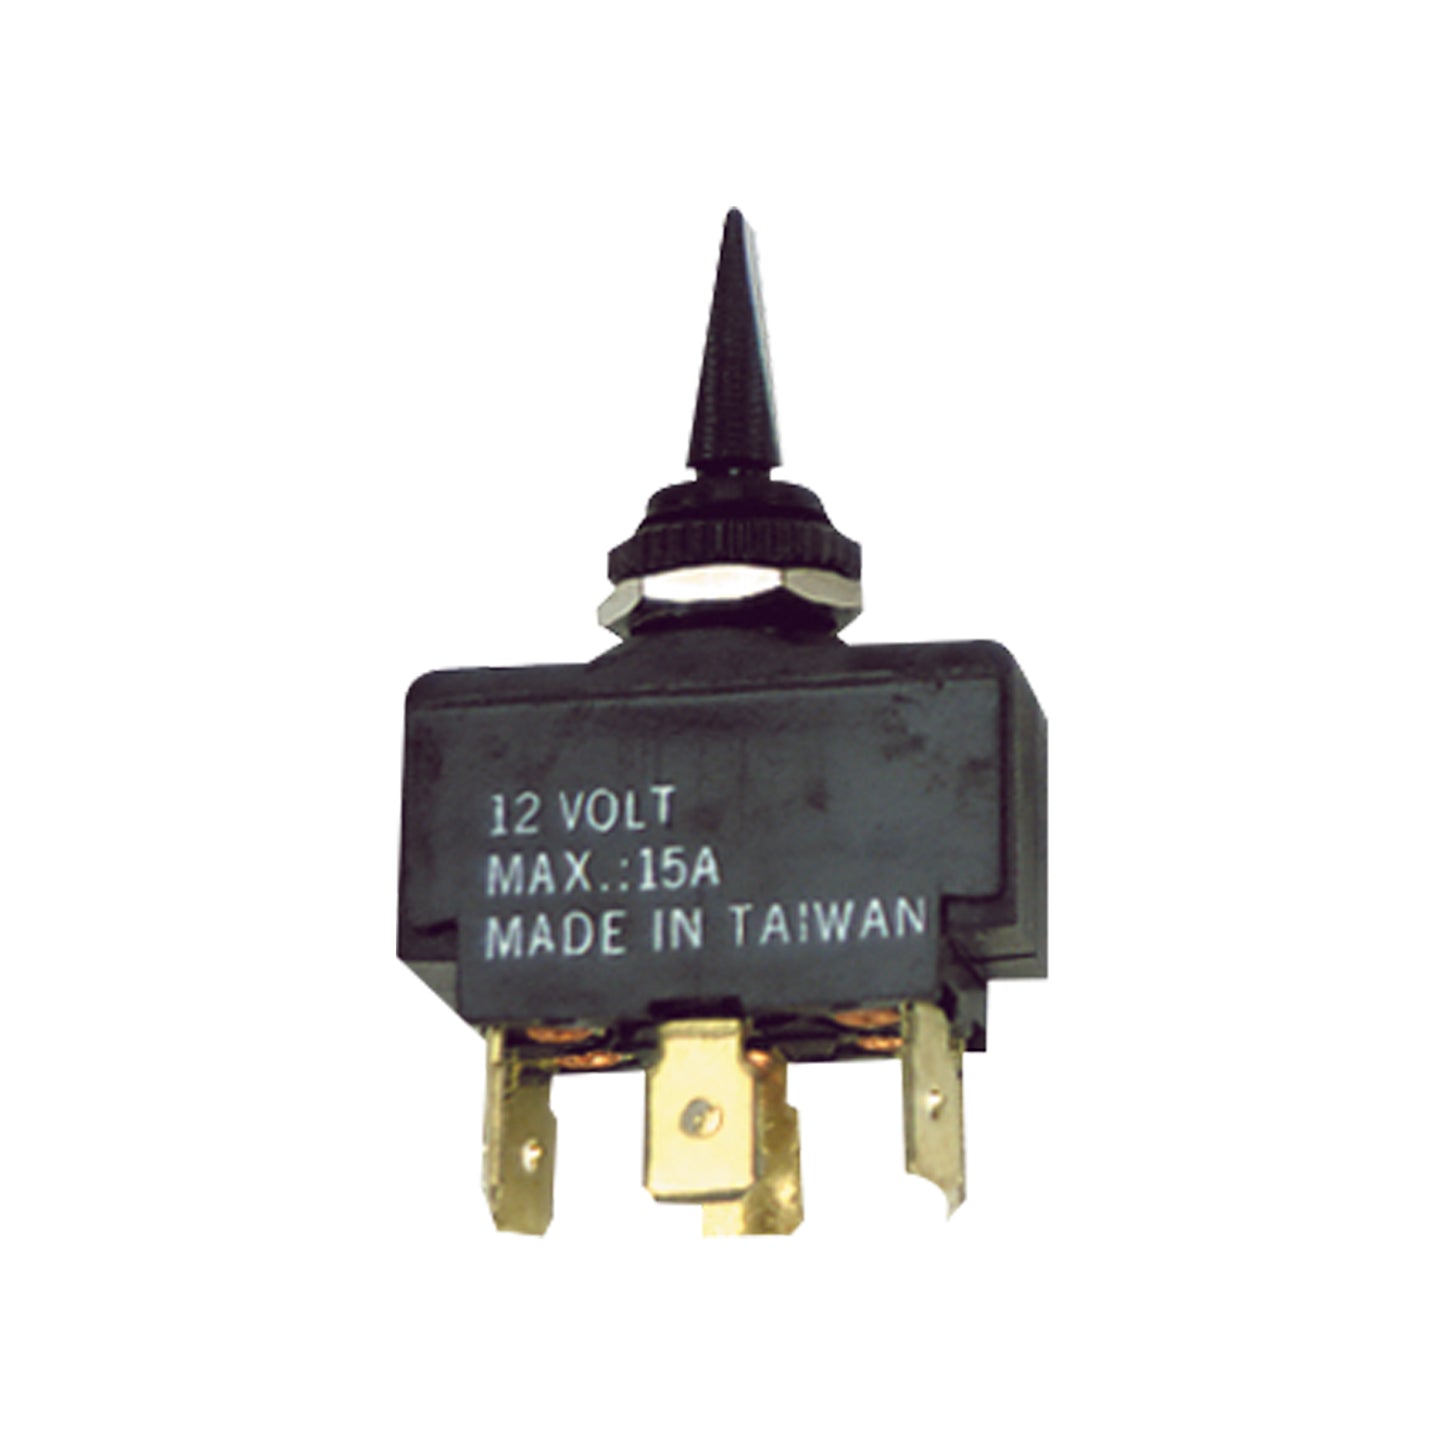 Carling Toggle Switches - S-9062